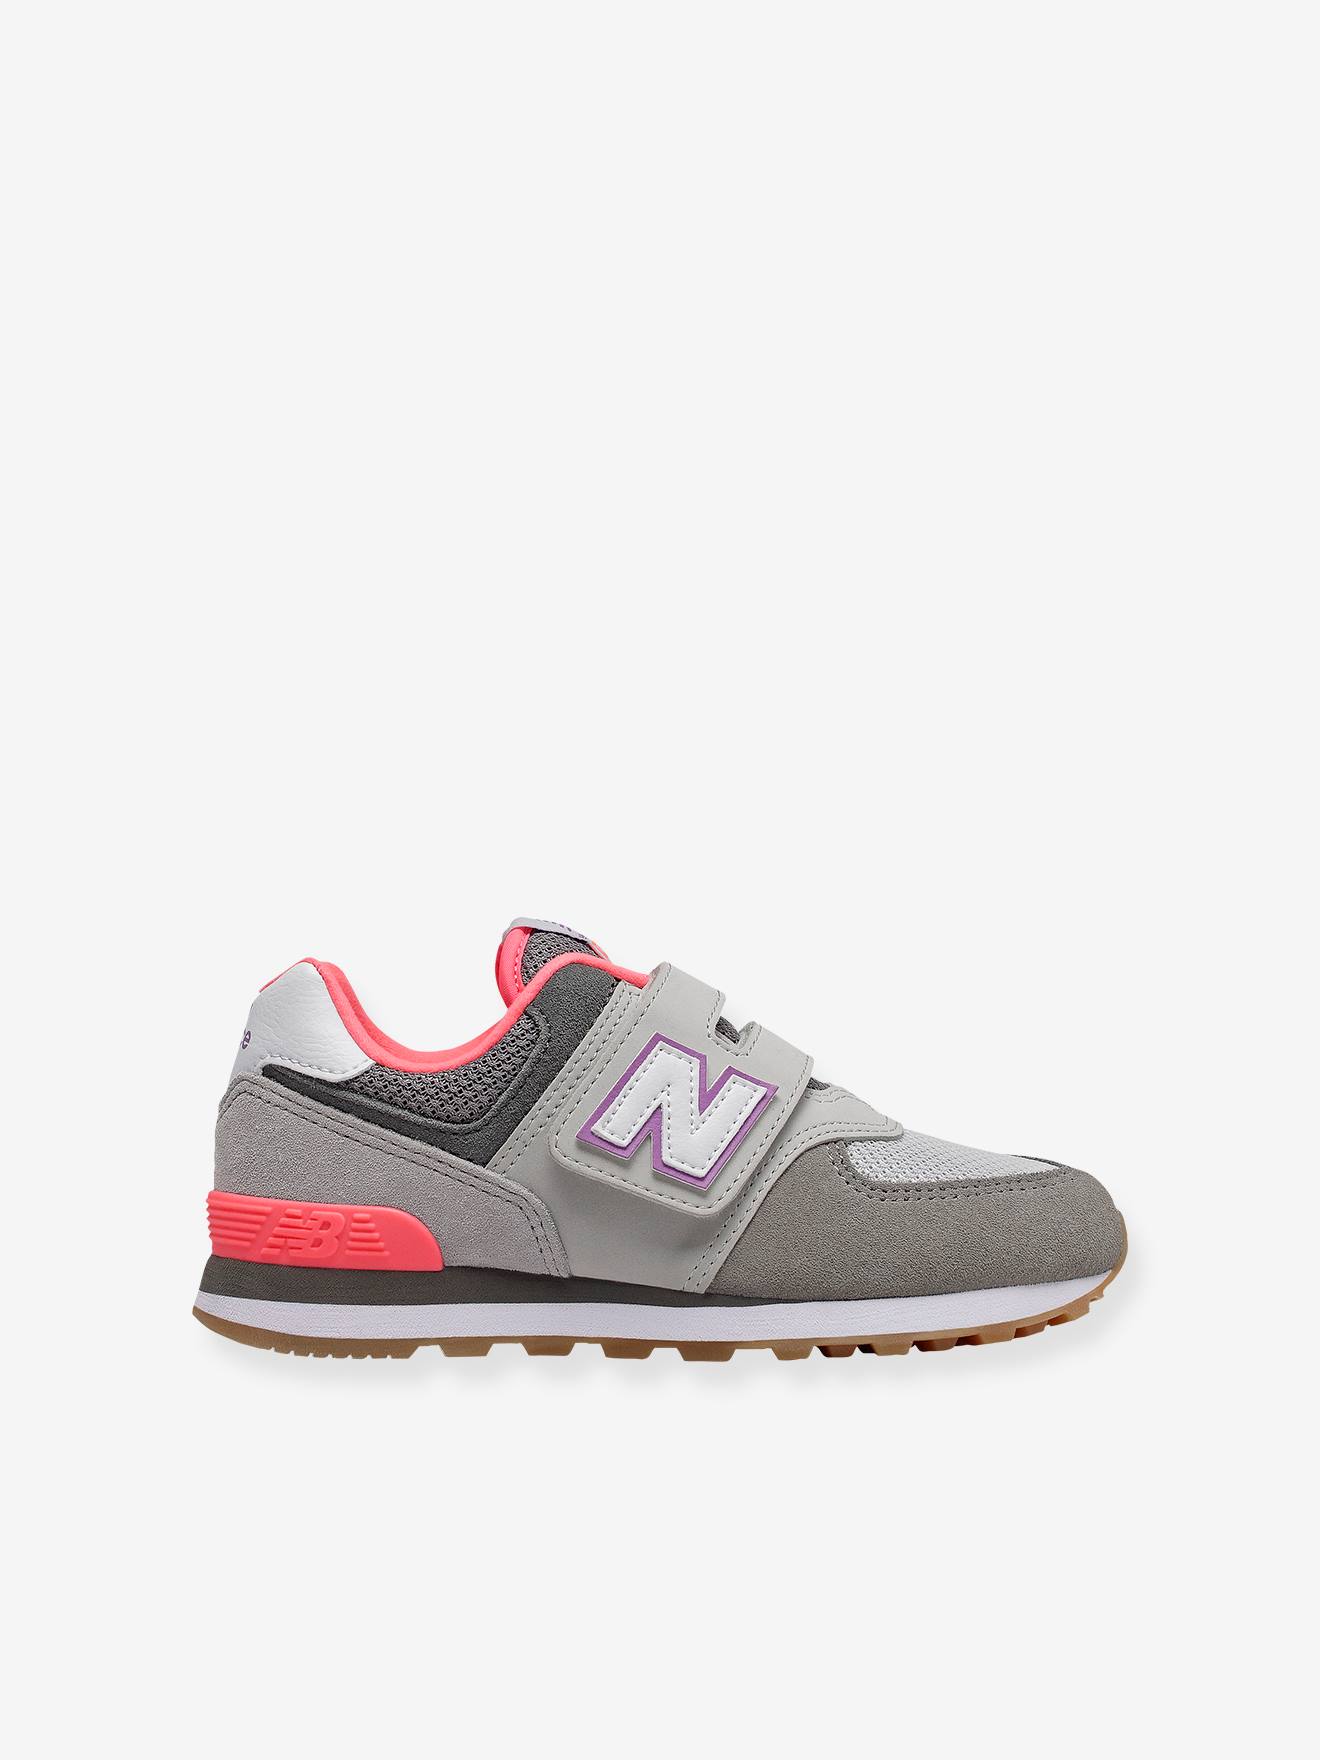 Baskets cuir scratchées fille YV574SOC NEW BALANCE - gris, Chaussures